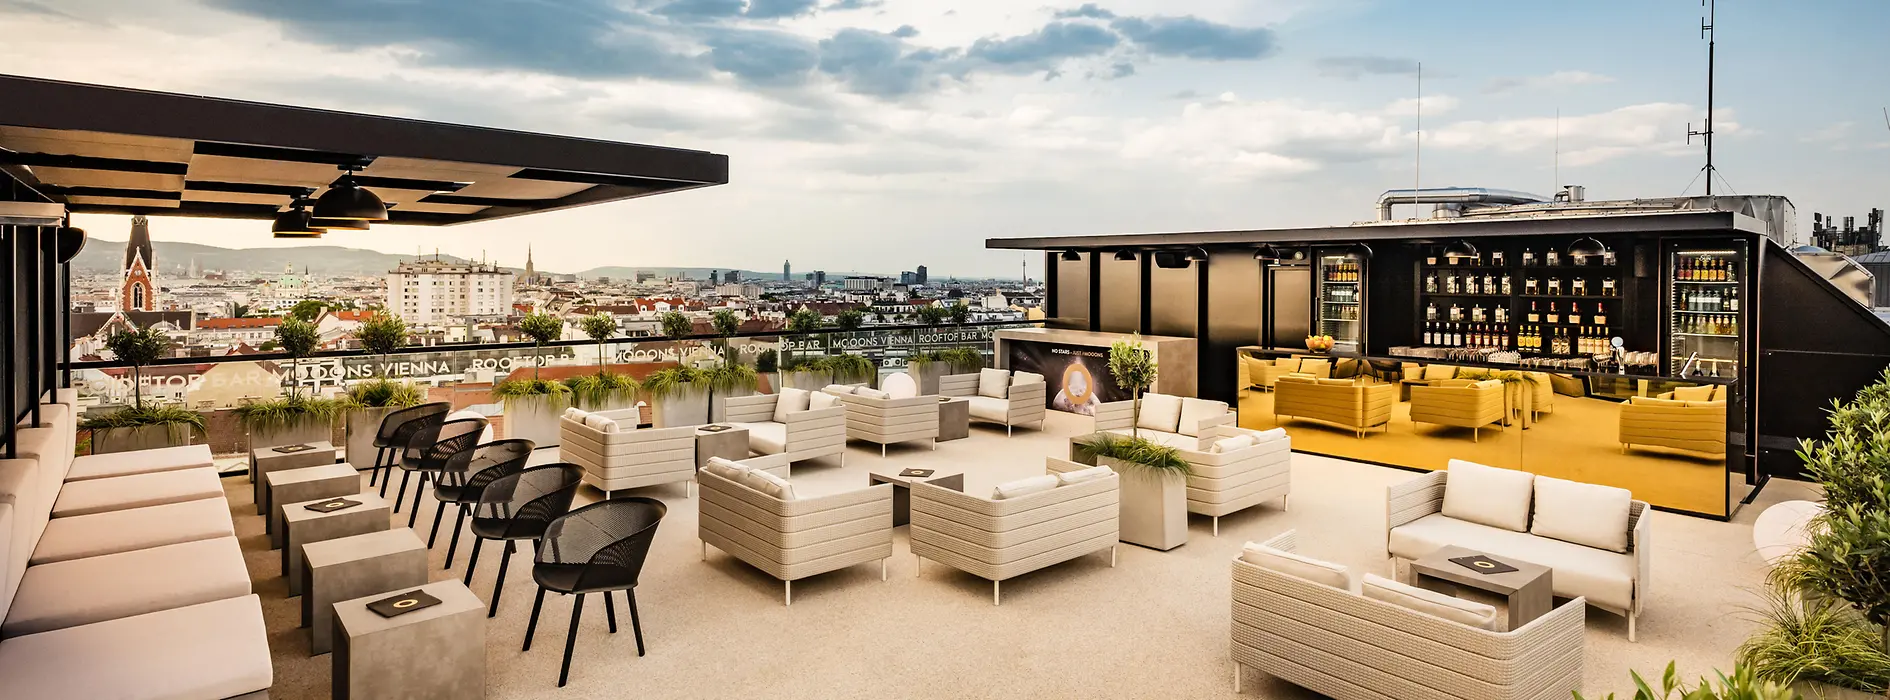 Rooftop bar with view over Vienna